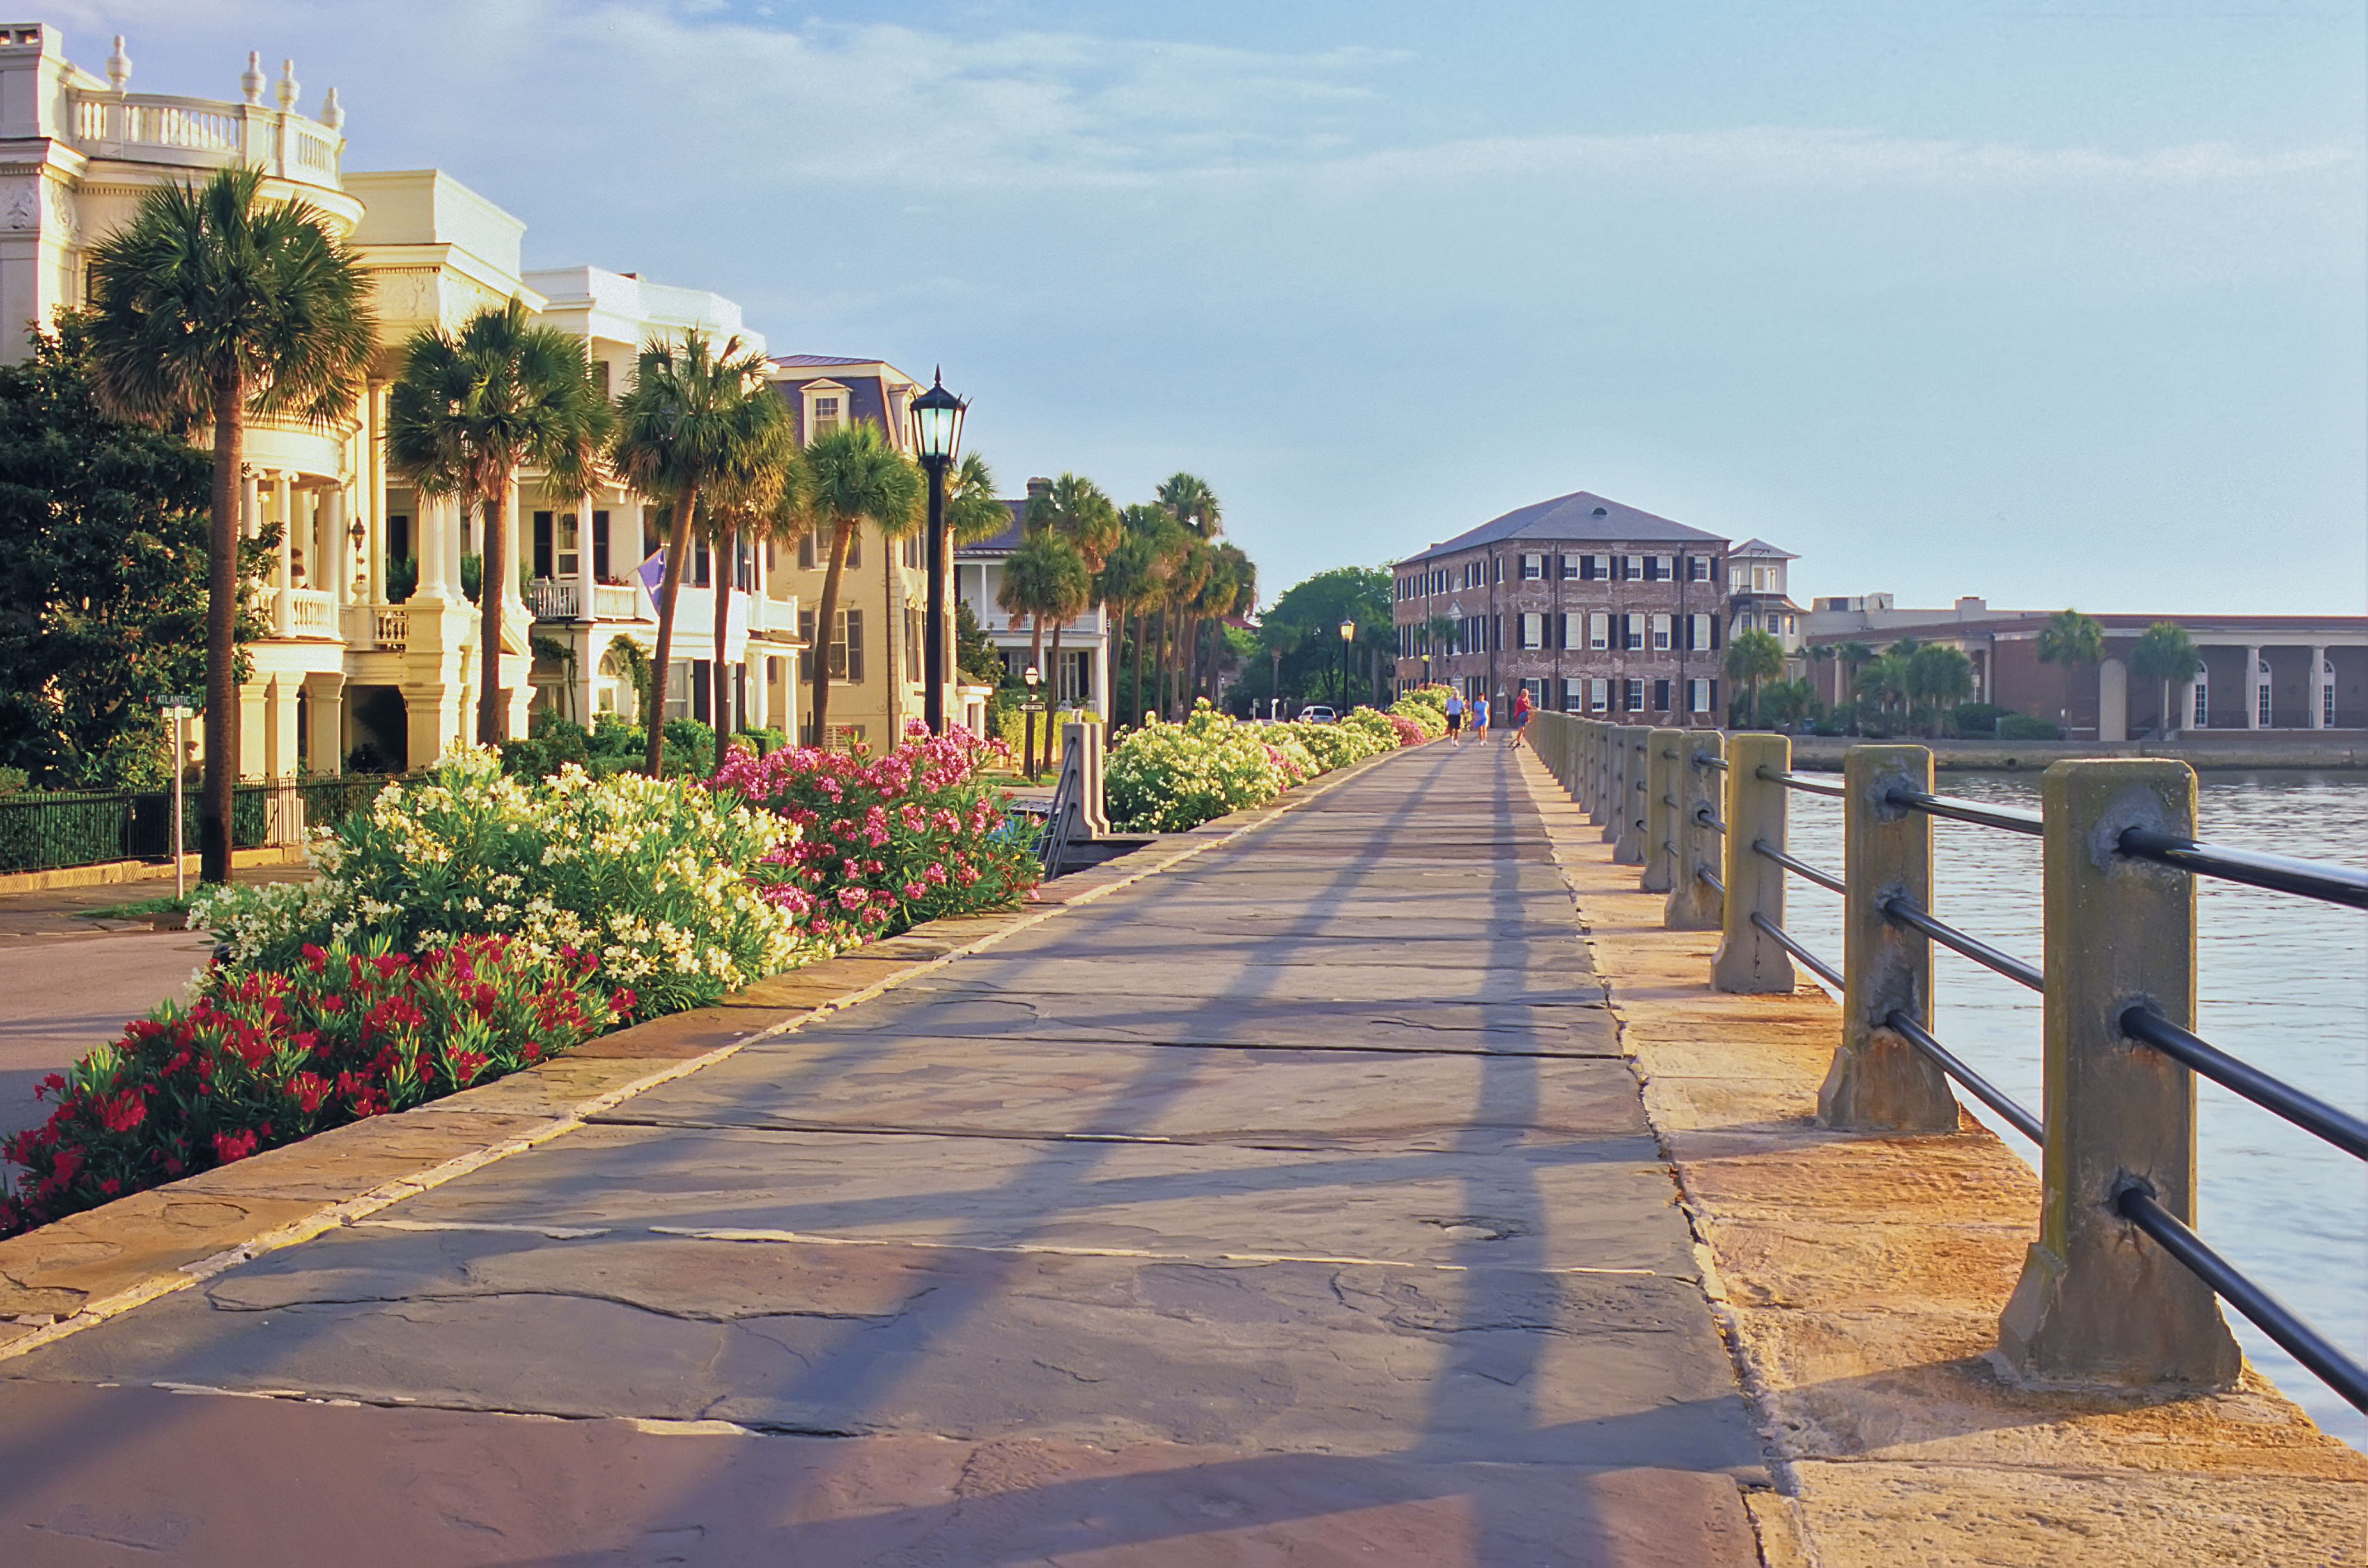 Charleston South Carolina is Charming along the Seawall get there easily from Wilmington Airport ILG